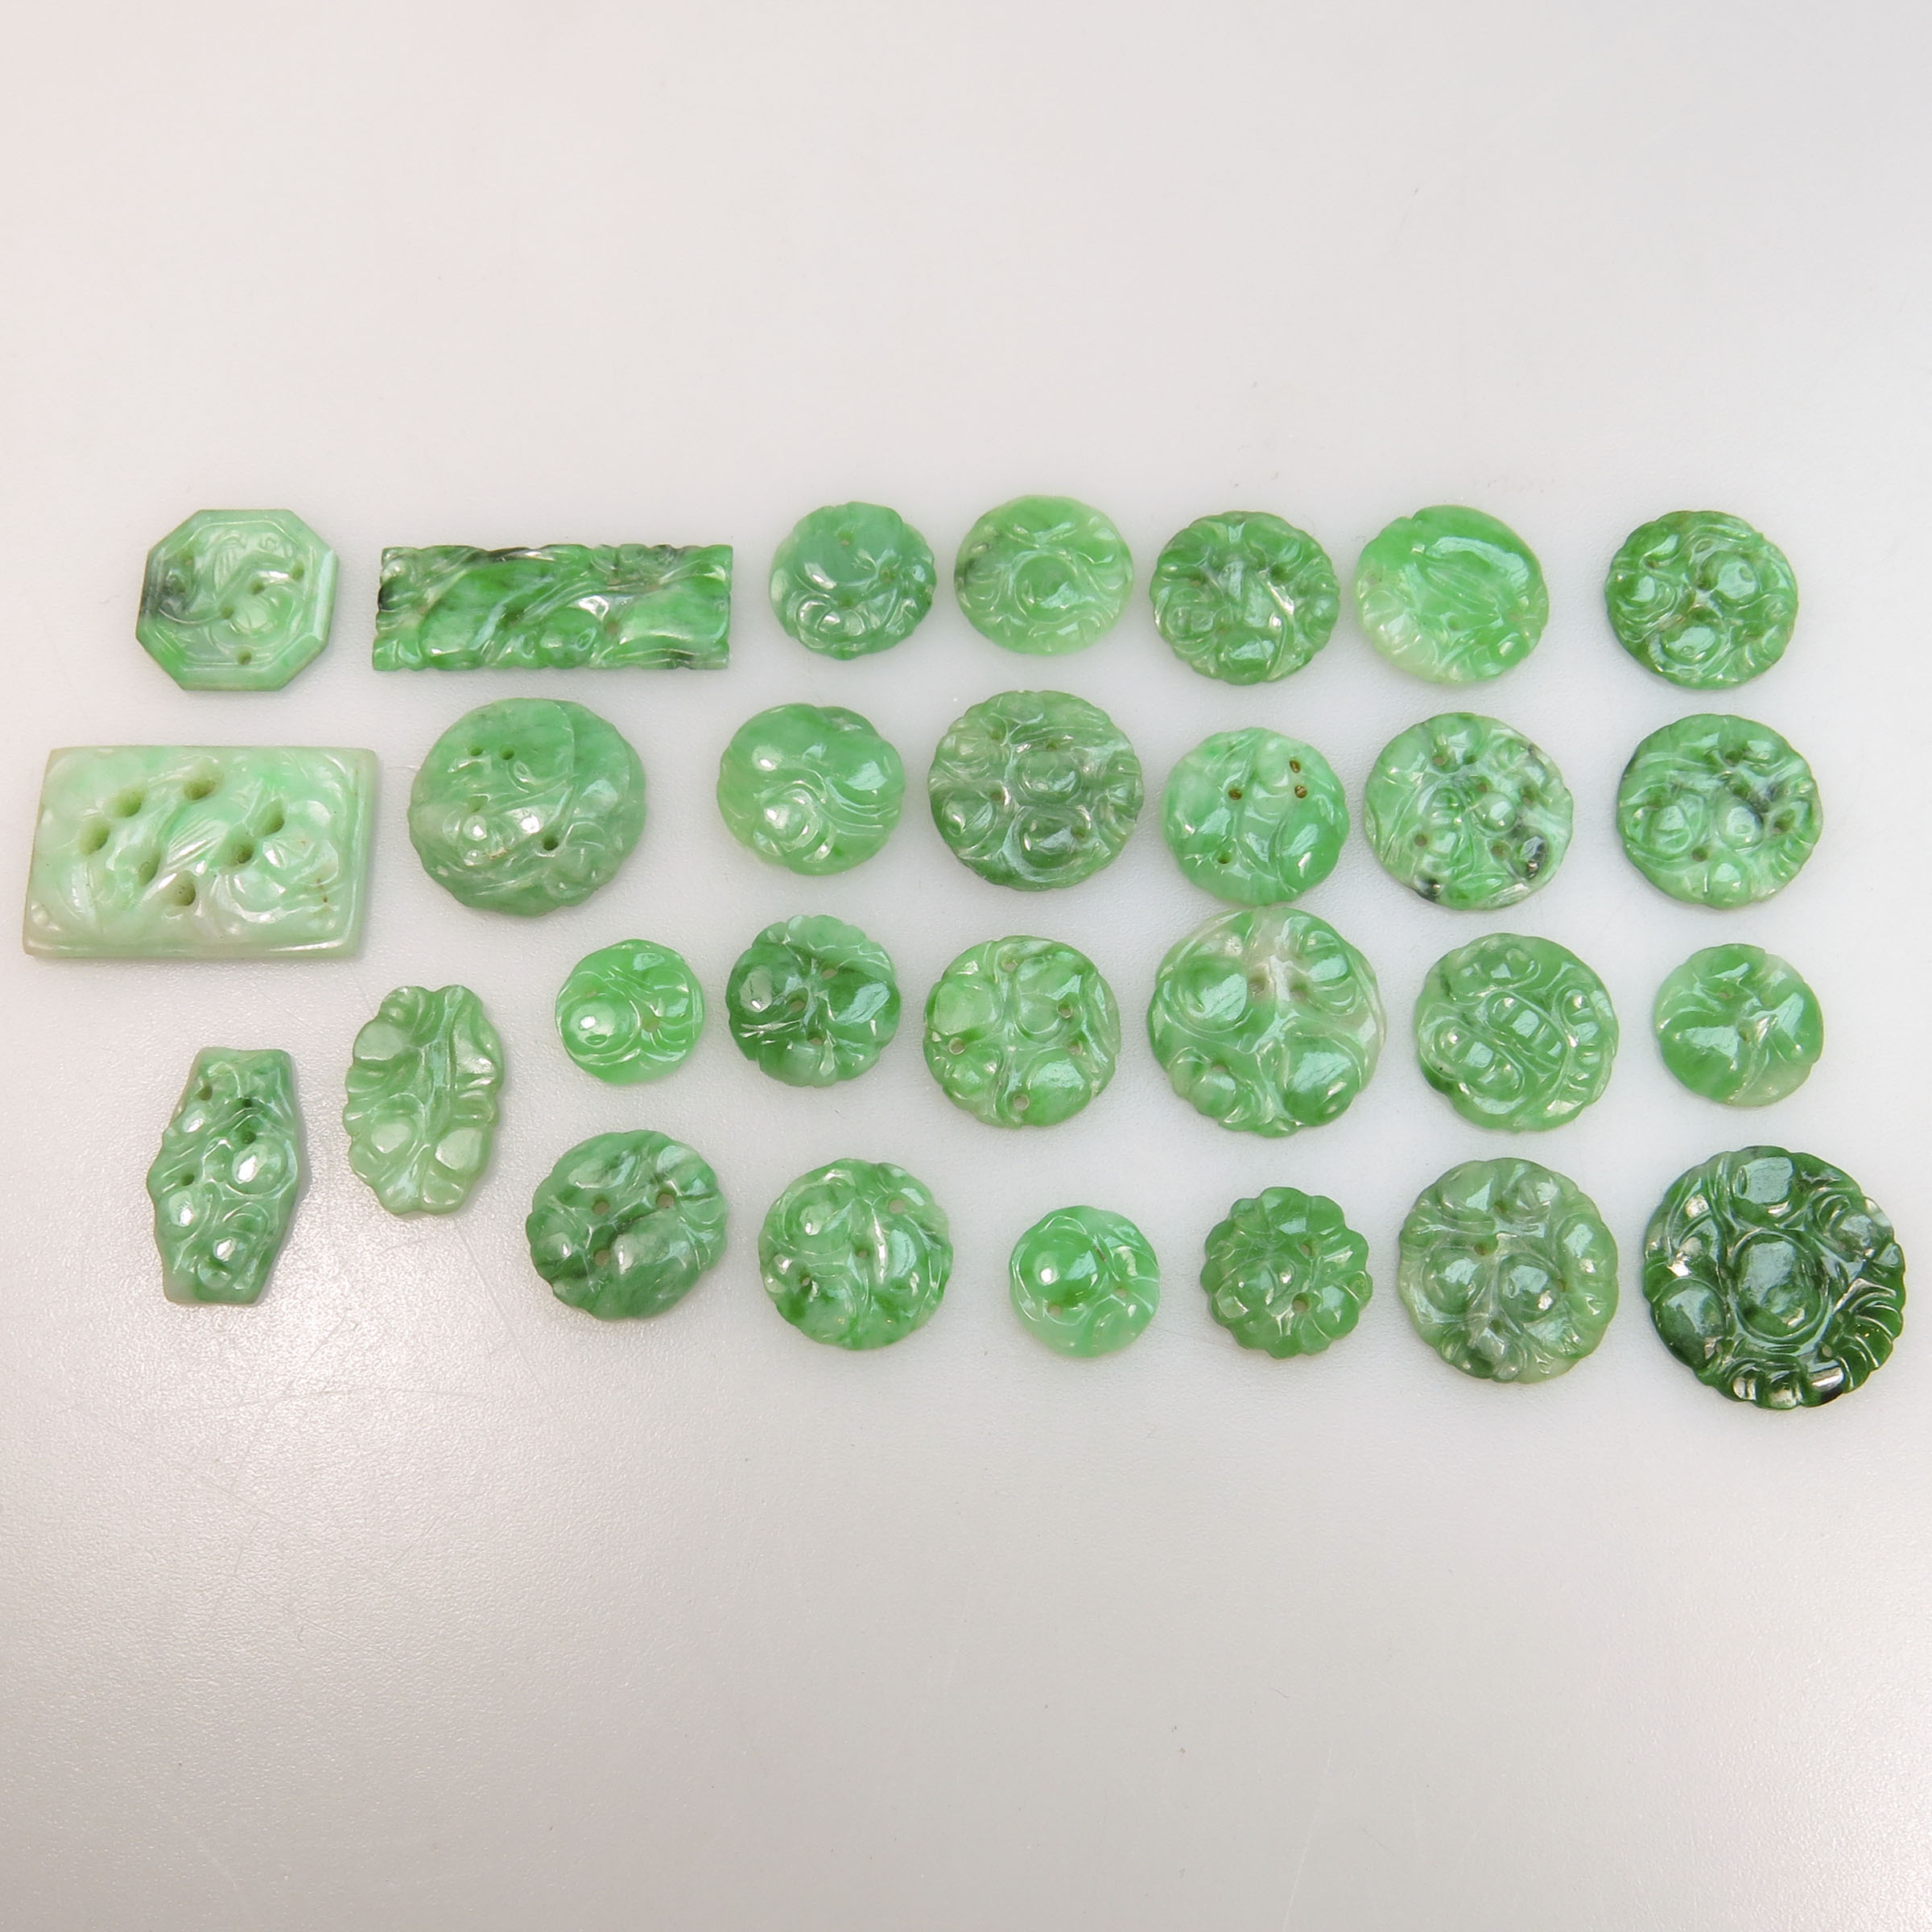 39 Carved And Pierced Various Shaped Jadeite Panels